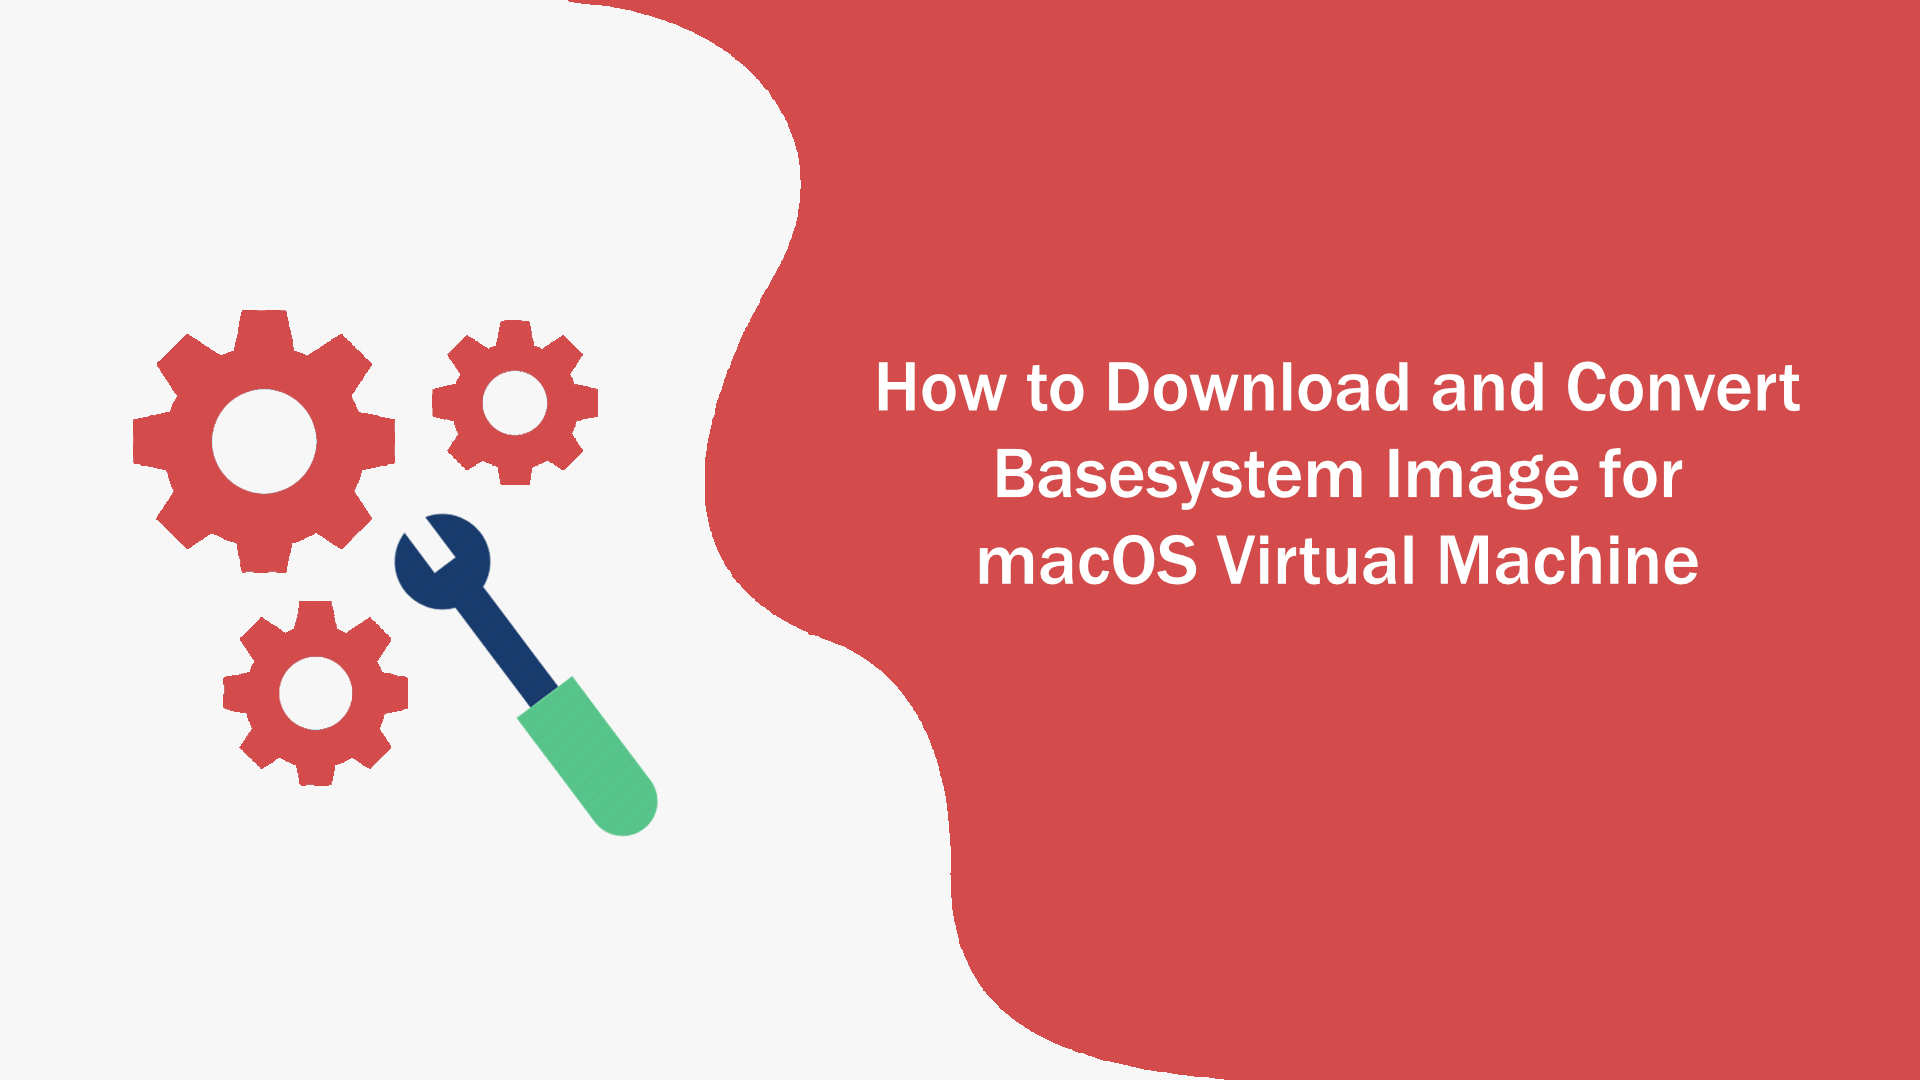 How to Download and Convert Basesystem Image for macOS Virtual Machine